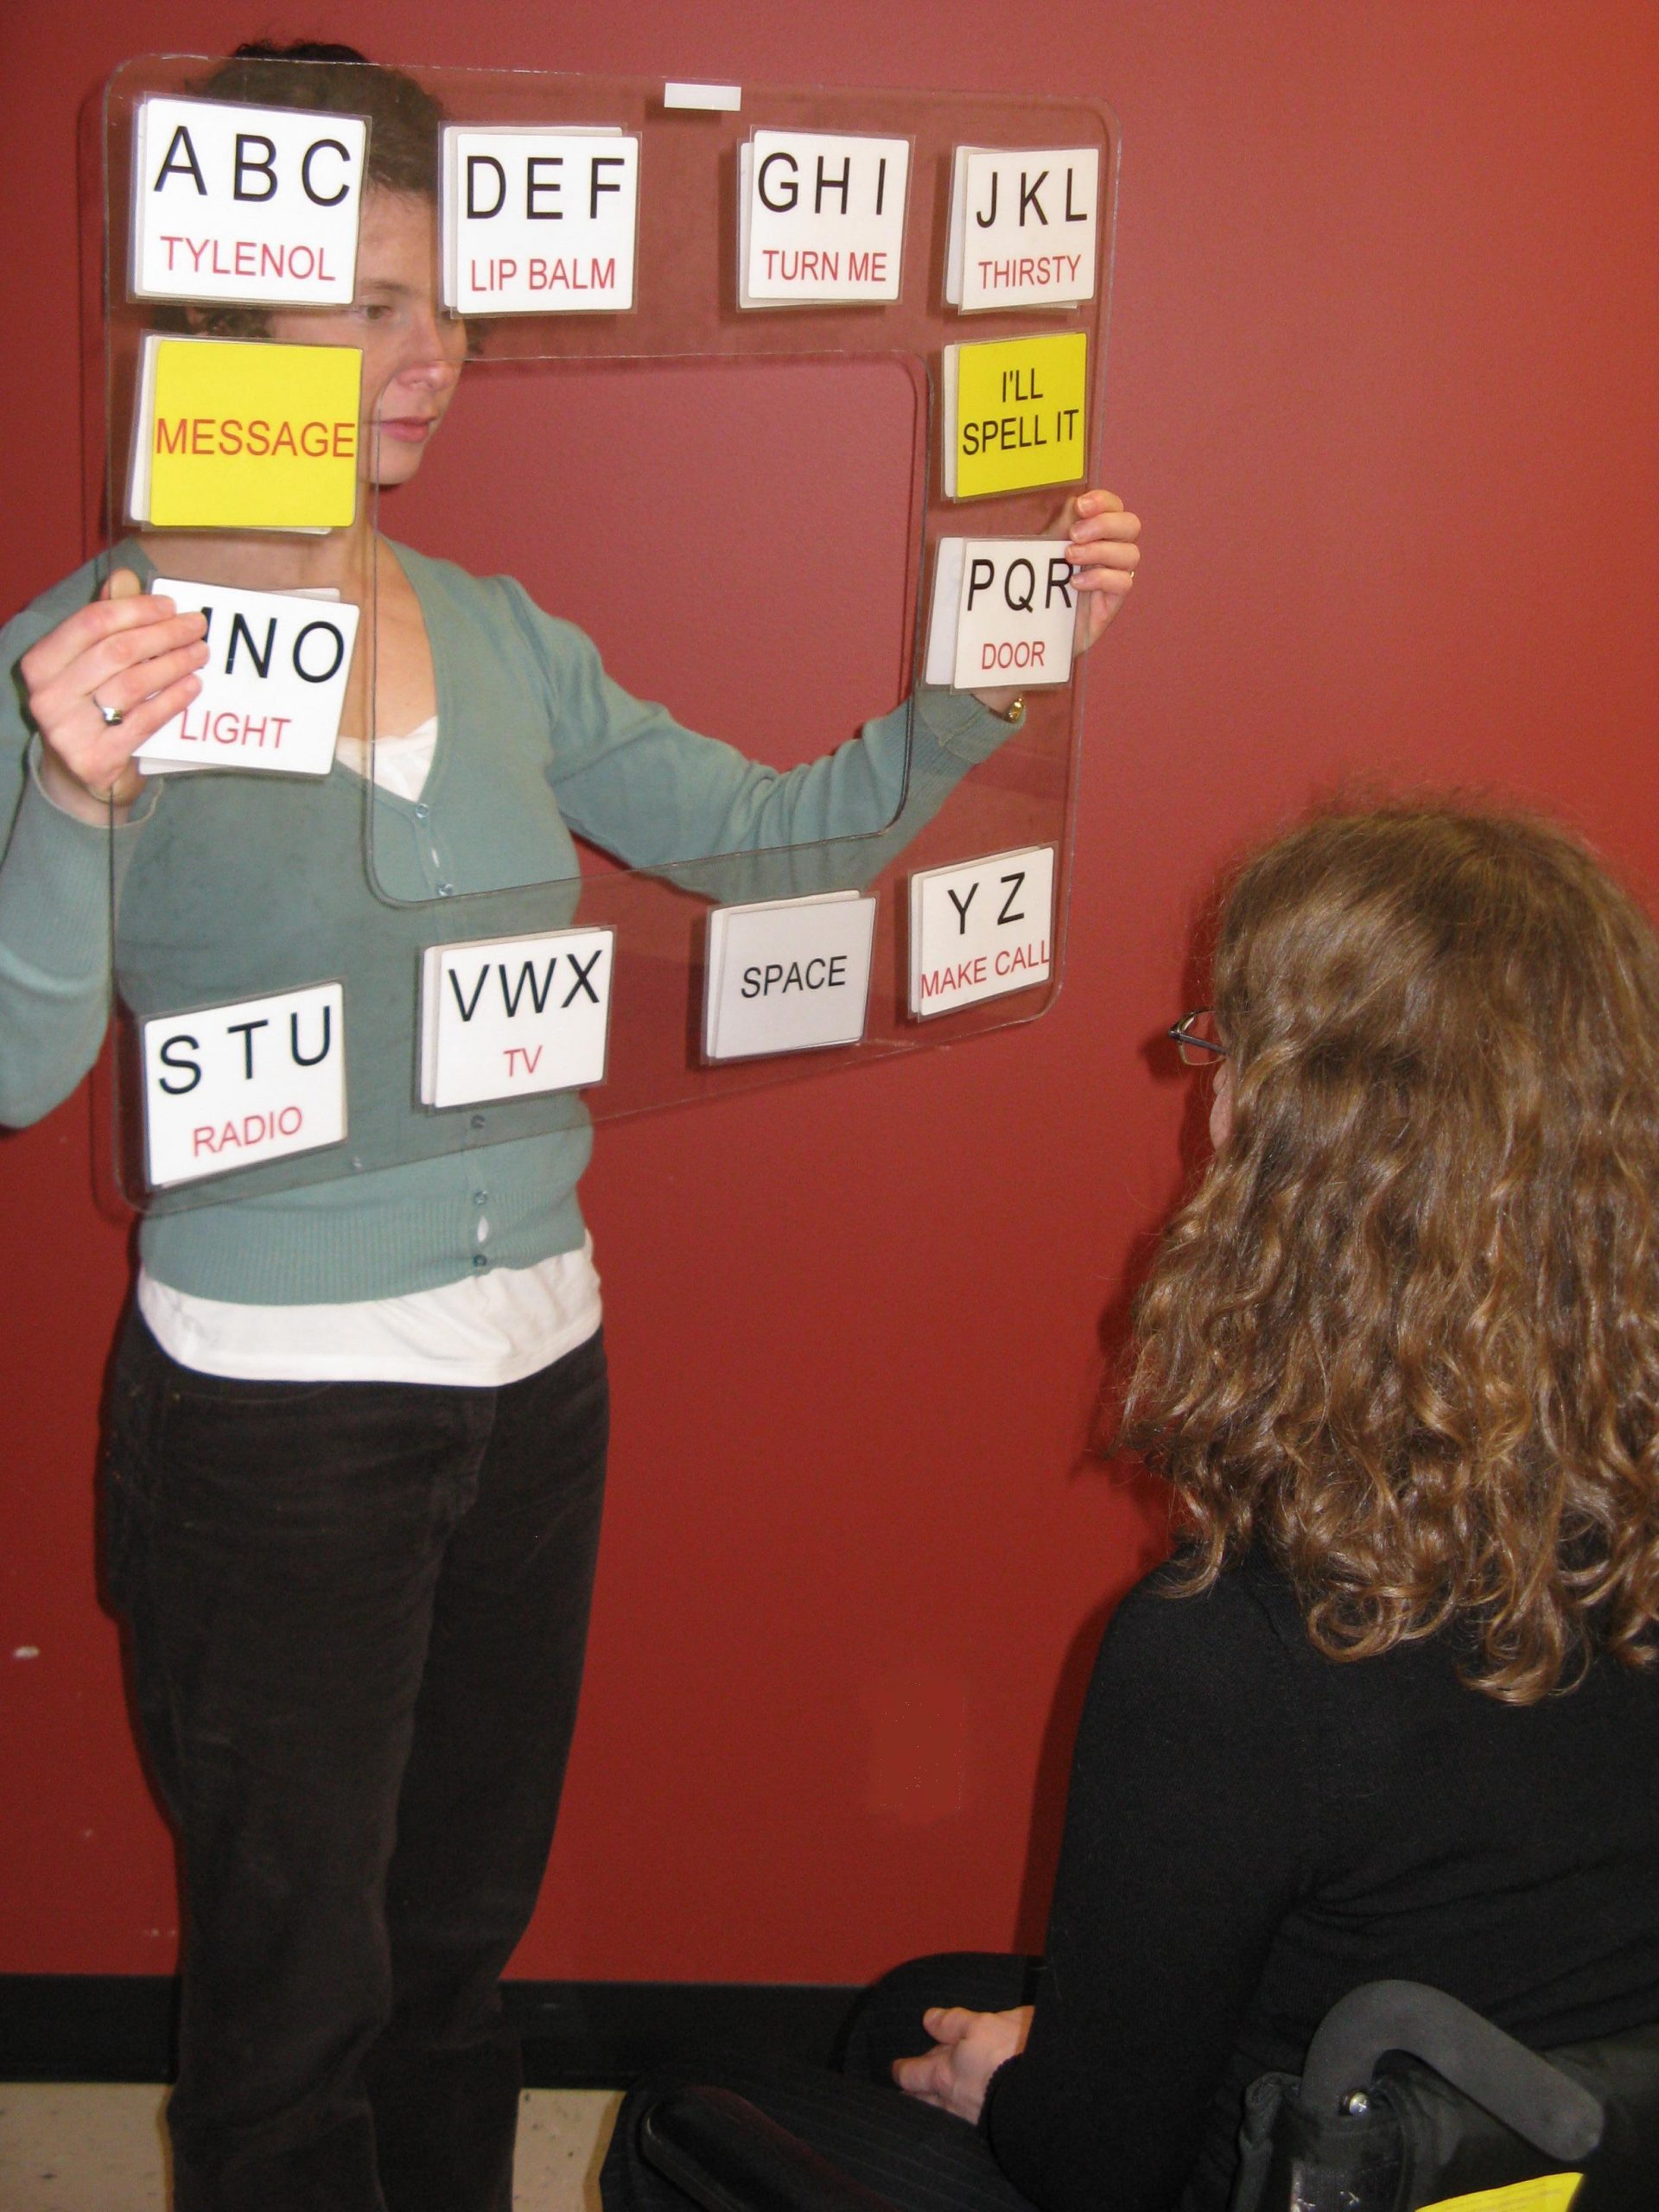 Descriptive image showing a presenter holding a sign as her visual aid. (10.1.0)